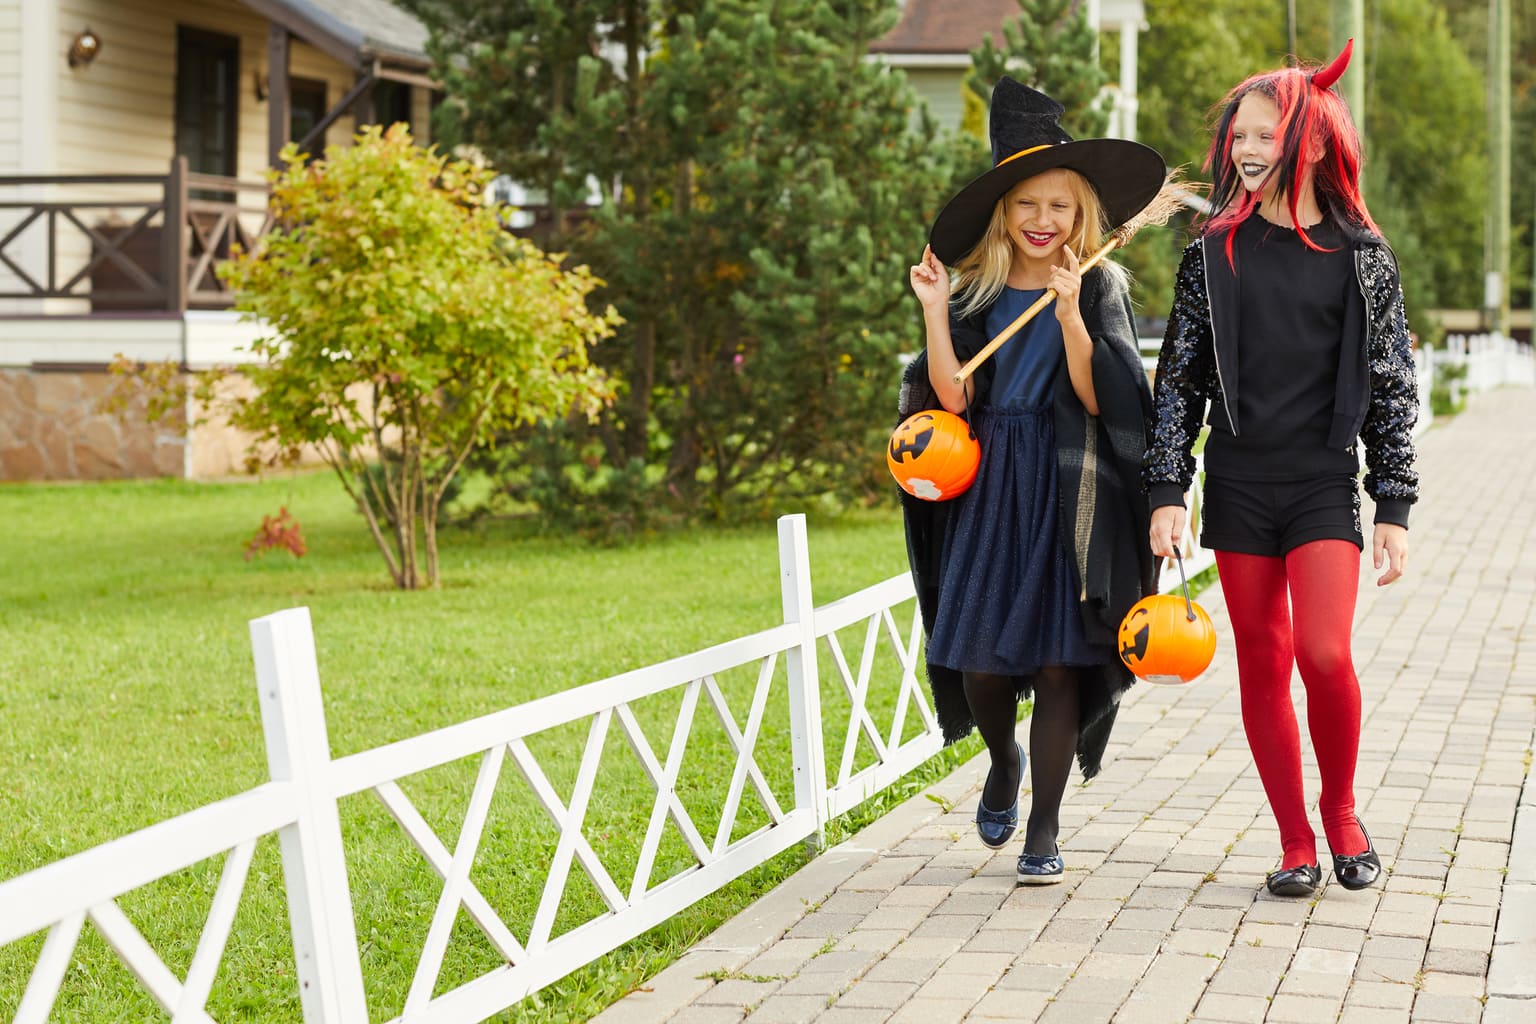 teens are trick or treating - how to keep them safe